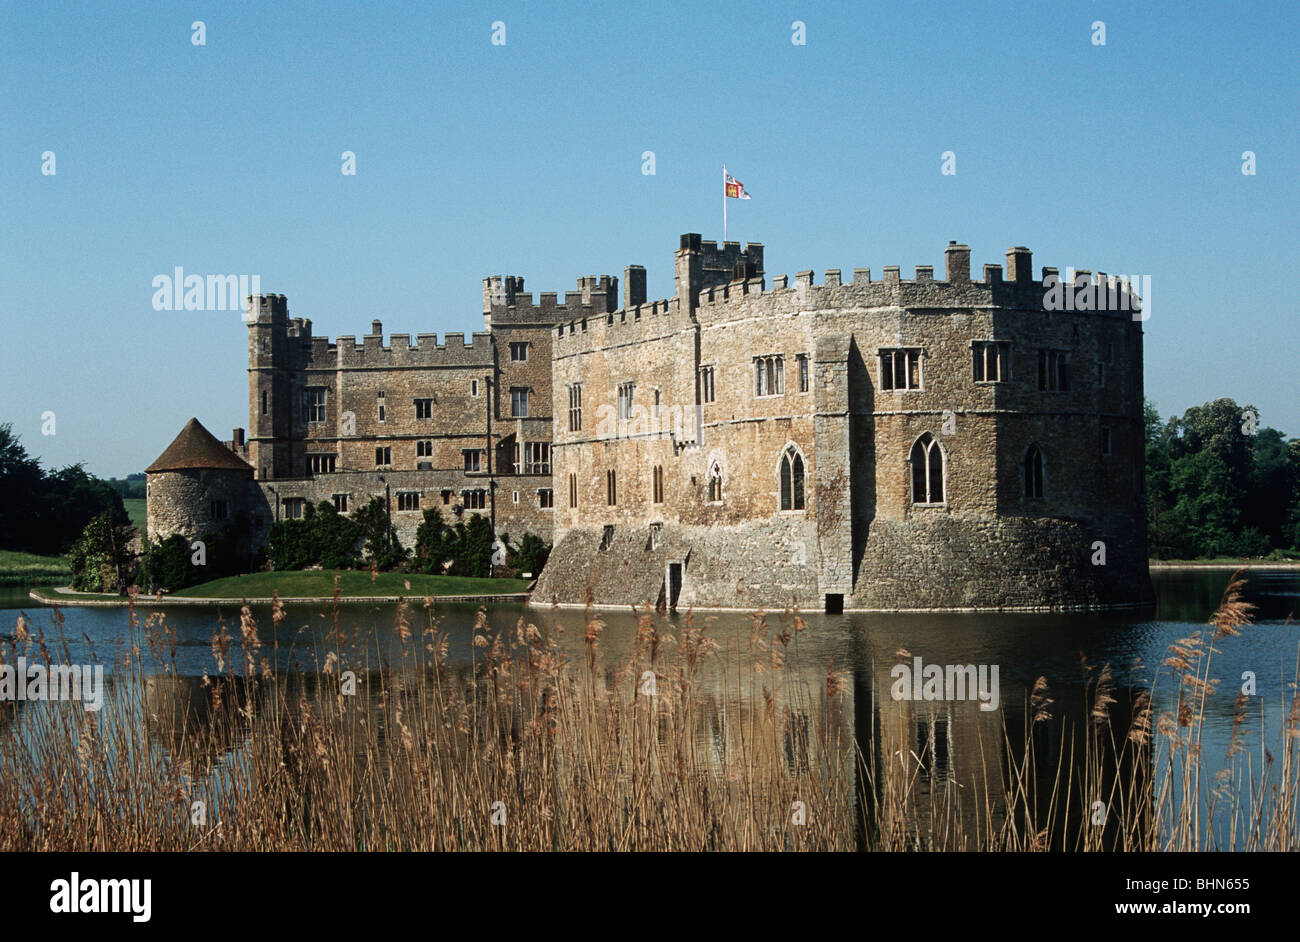 Leeds Castle in Kent, viewed from across the moat Stock Photo